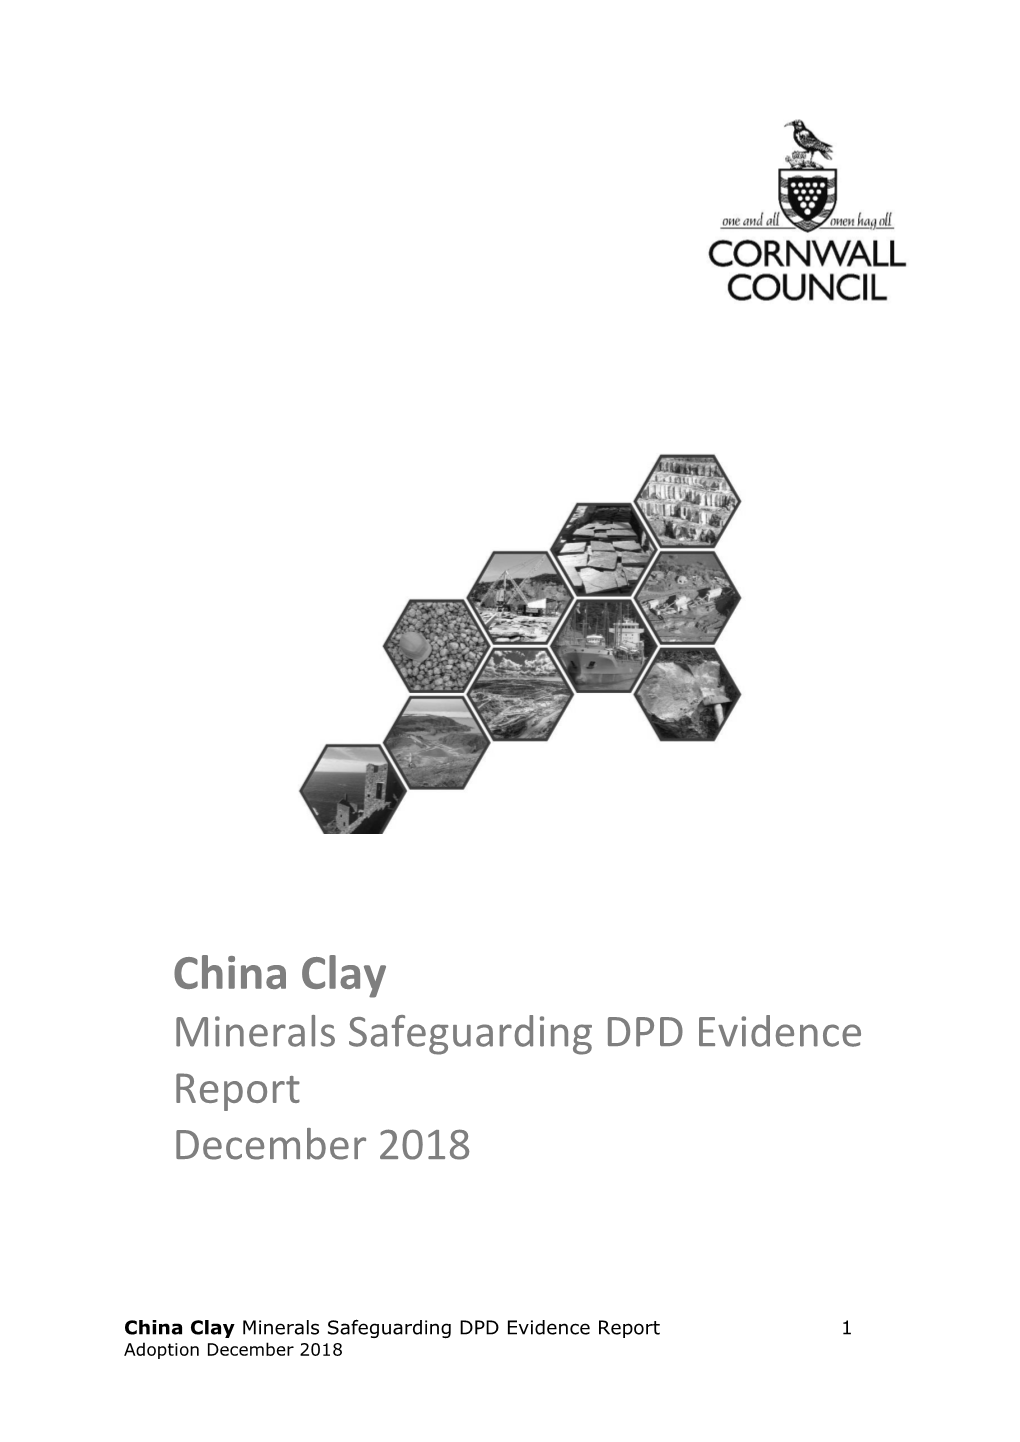 China Clay Minerals Safeguarding DPD Evidence Report December 2018